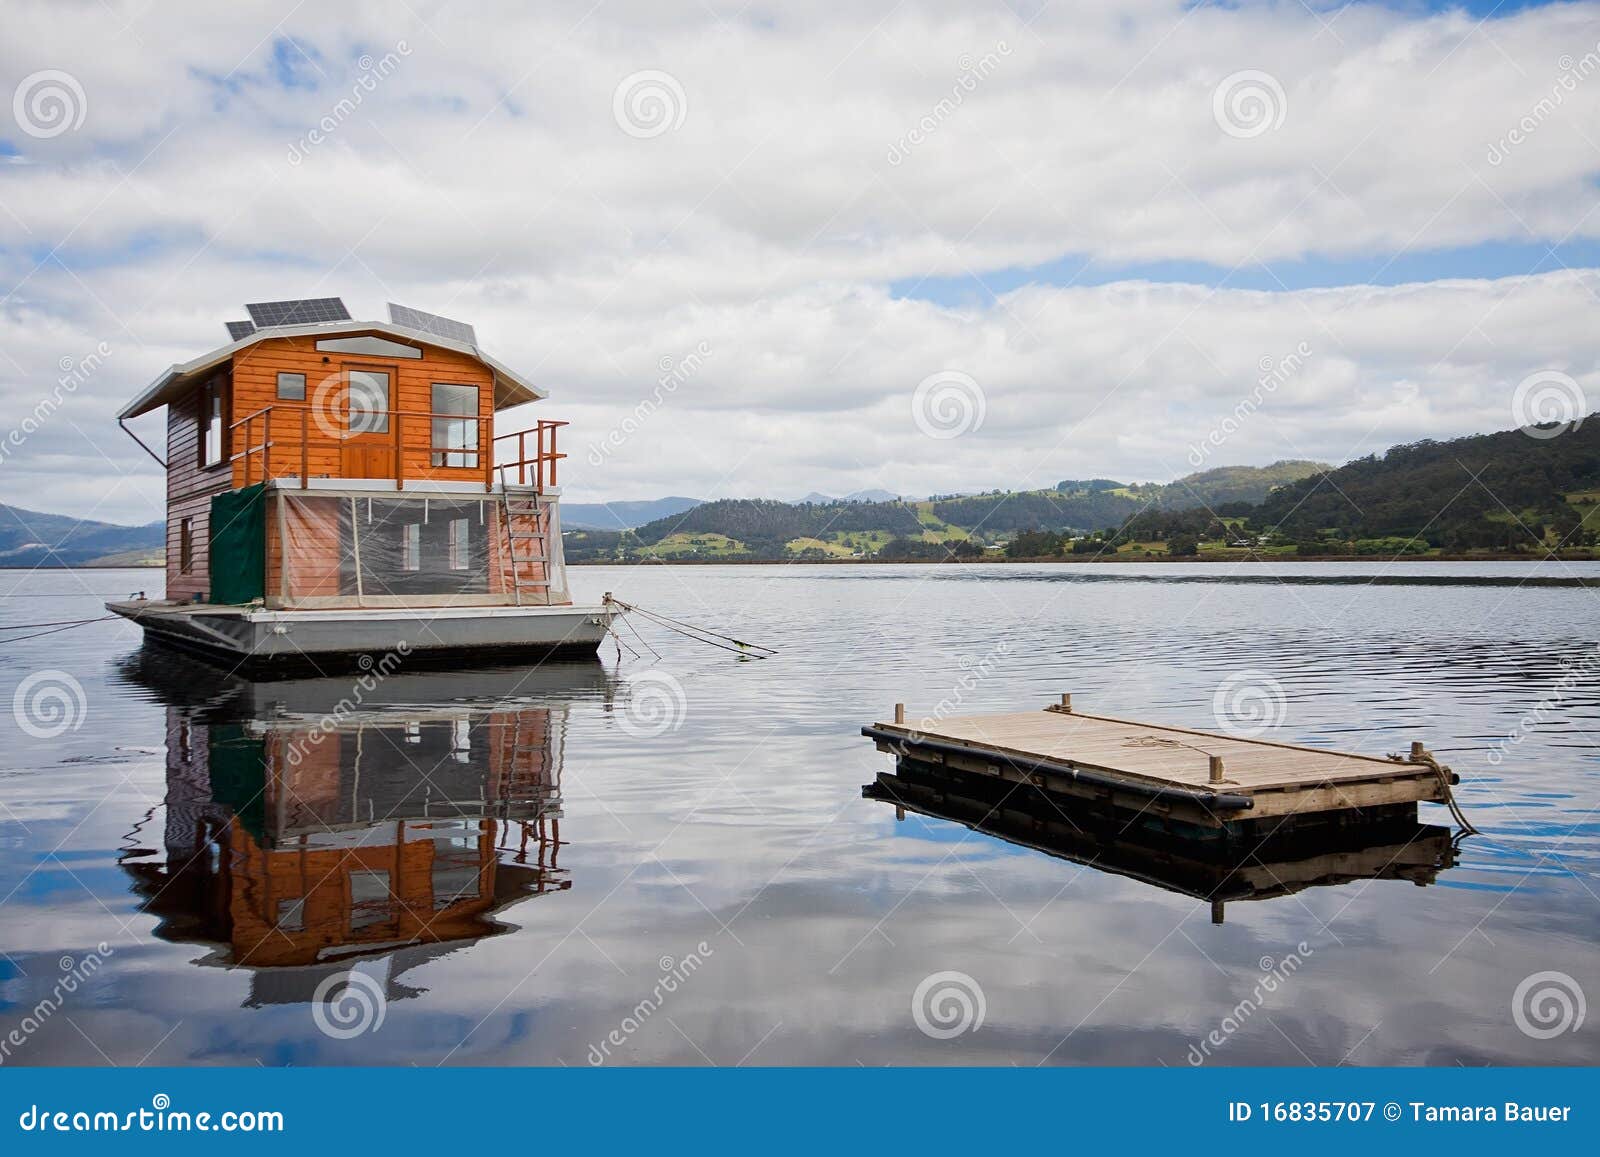 houseboat on river